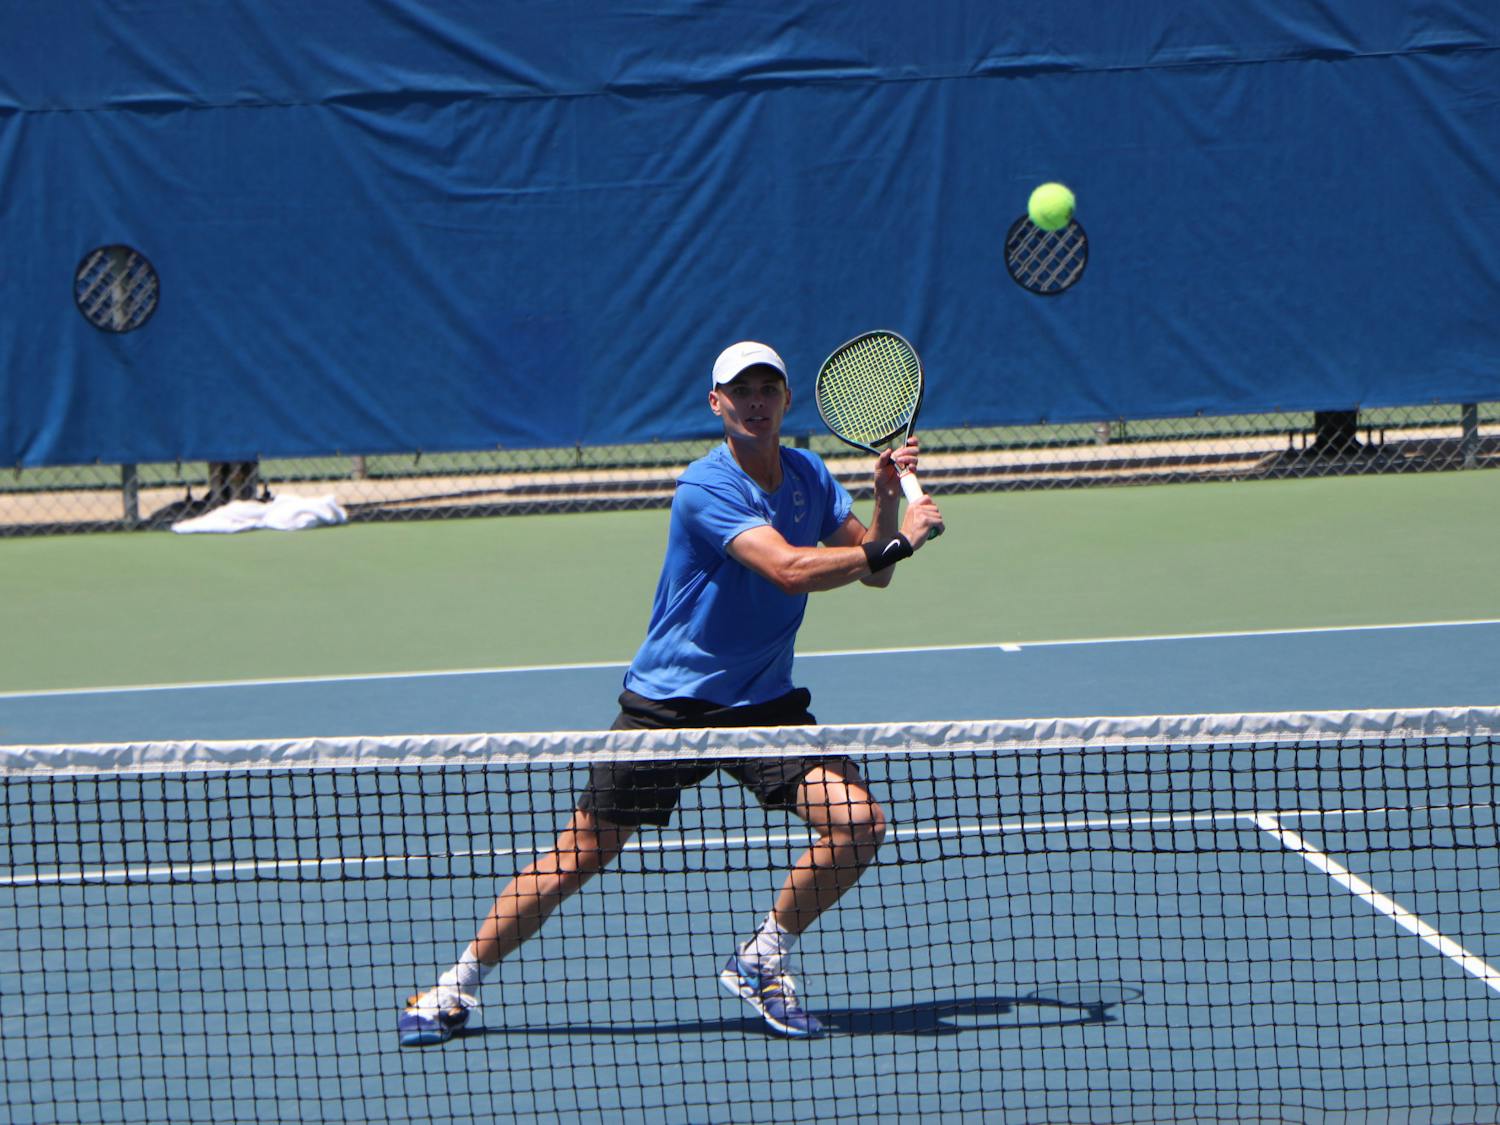 Florida's Sam Riffice prepares to return a ball against South Florida on May 9. Riffice defeated South Carolina's Daniel Rodrigues 3-6, 6-1, 6-4 to win the individual singles national championship Friday afternoon.